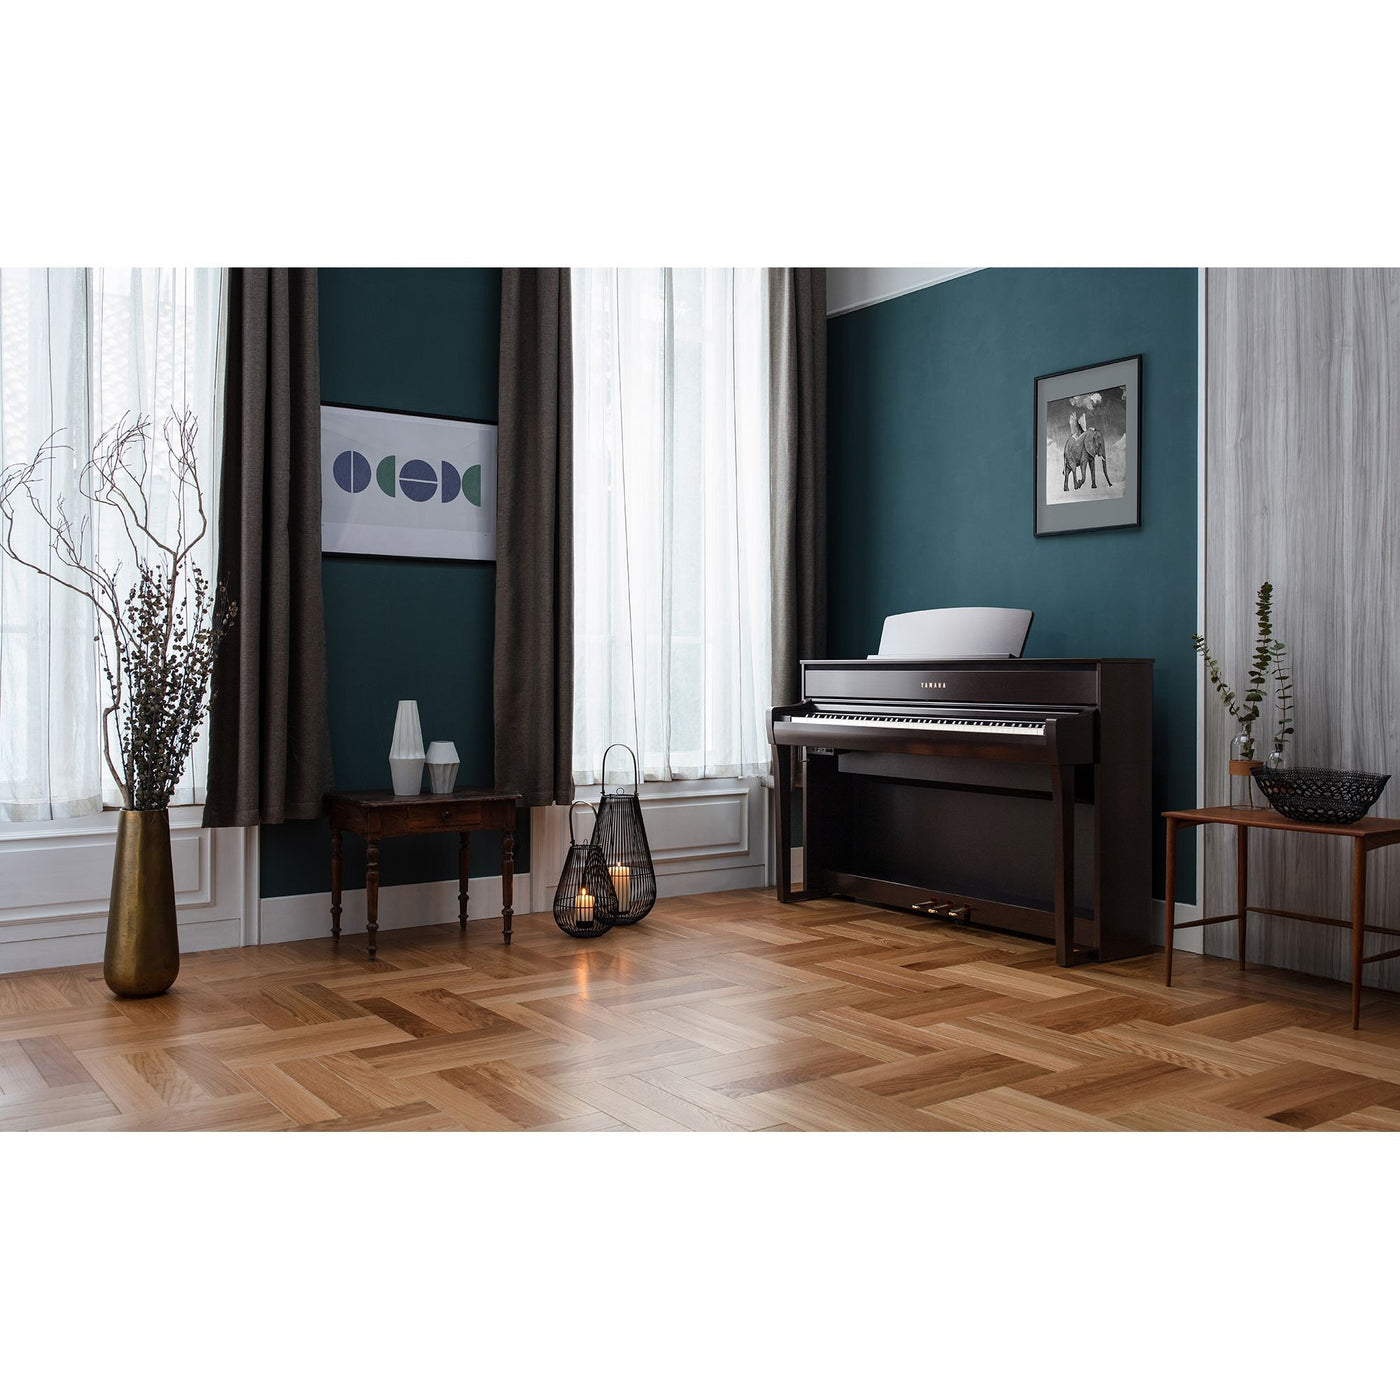 elegant interior room with a black piano, decorative elements, and furniture against a teal wall with long drapes on windows.